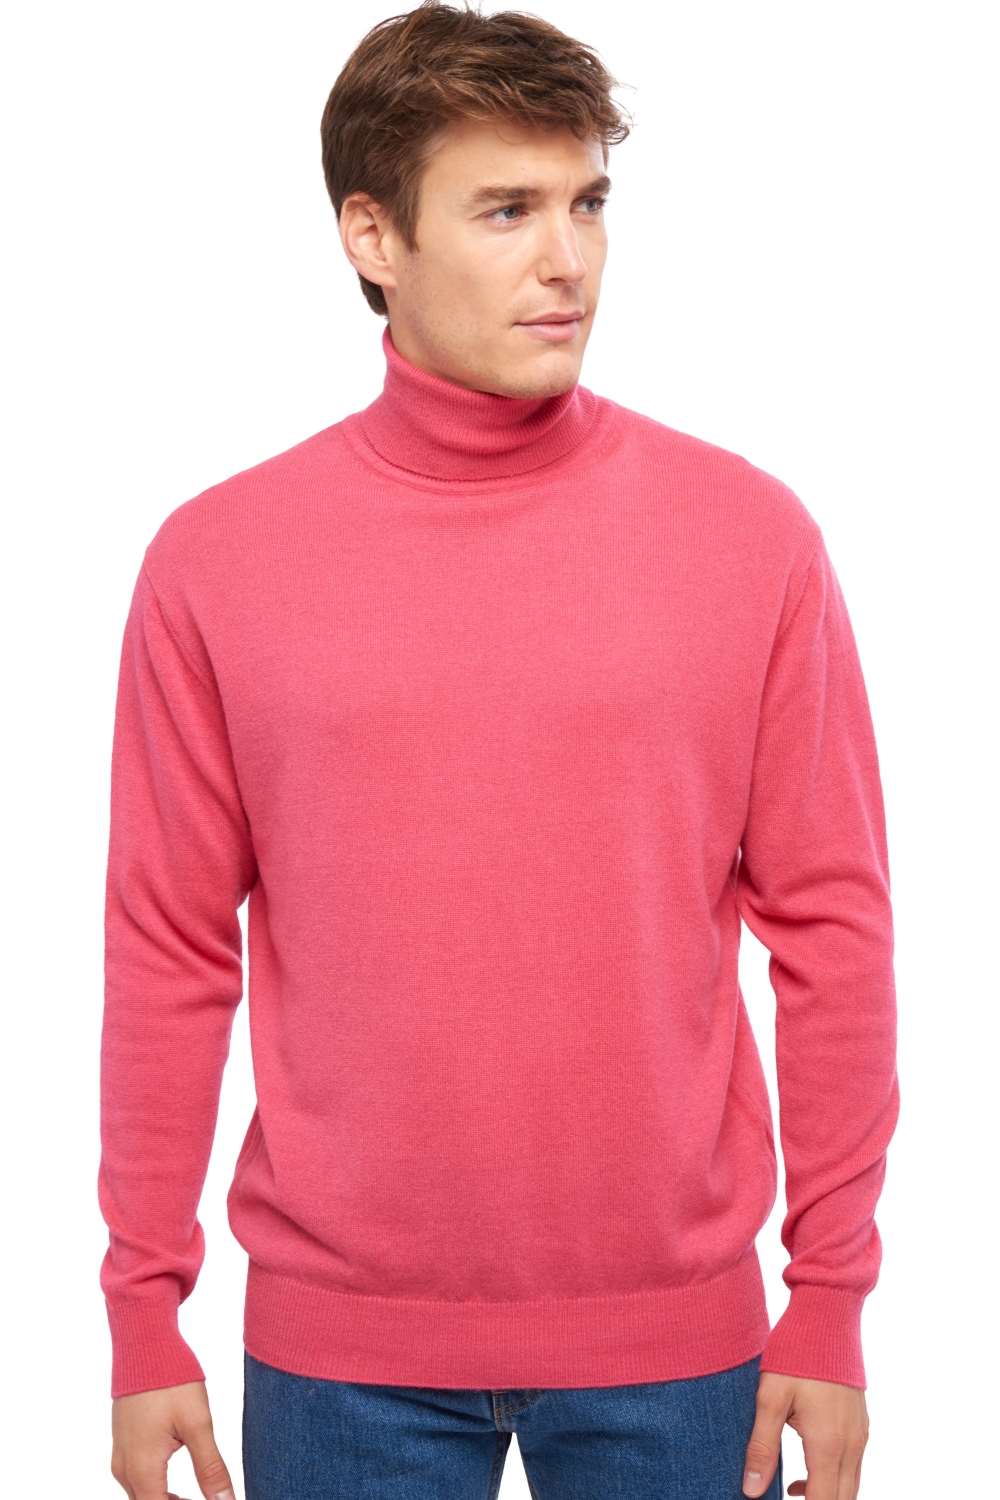 Cachemire pull homme col roule edgar rose shocking 2xl